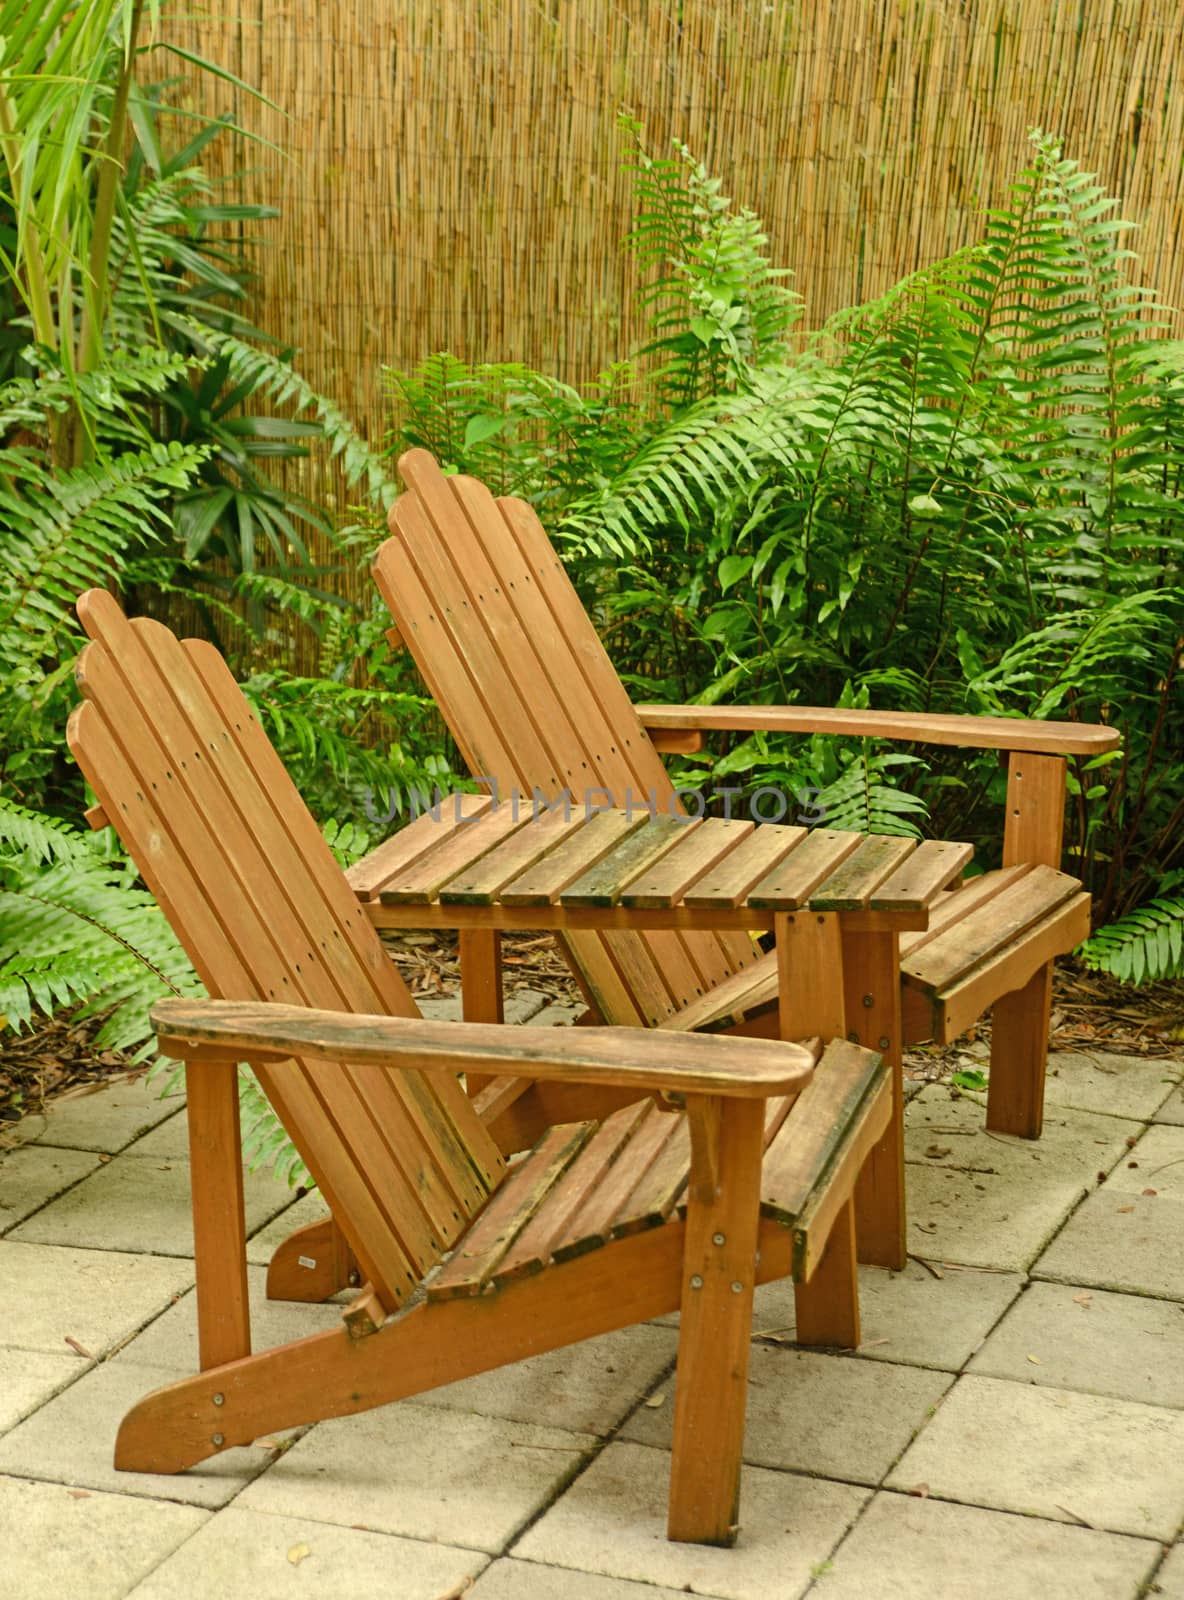 wooden Adirondack chairs in tropical backyard by ftlaudgirl